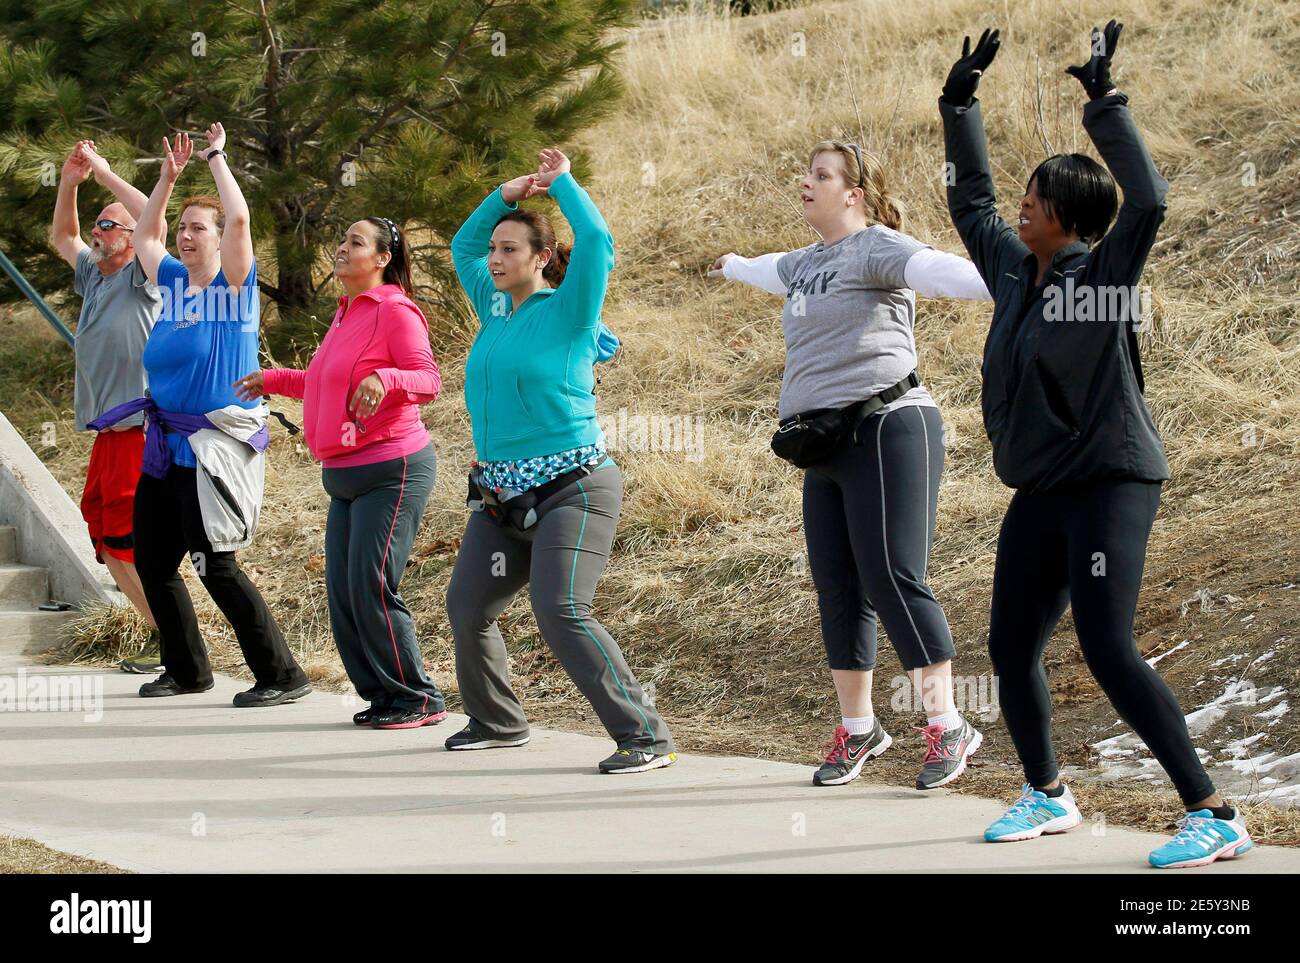 Jazmine Raygoza (C) and her mother Veronica (3rd L),  both bariatric surgery patients, do jumping jacks in a exercise class for bariatric surgery patients in Denver January 28, 2012.  Veronica was 188 lbs and Jazmine 225 lbs on this day.  REUTERS/Rick Wilking  (UNITED STATES - Tags: SOCIETY HEALTH) Stock Photo